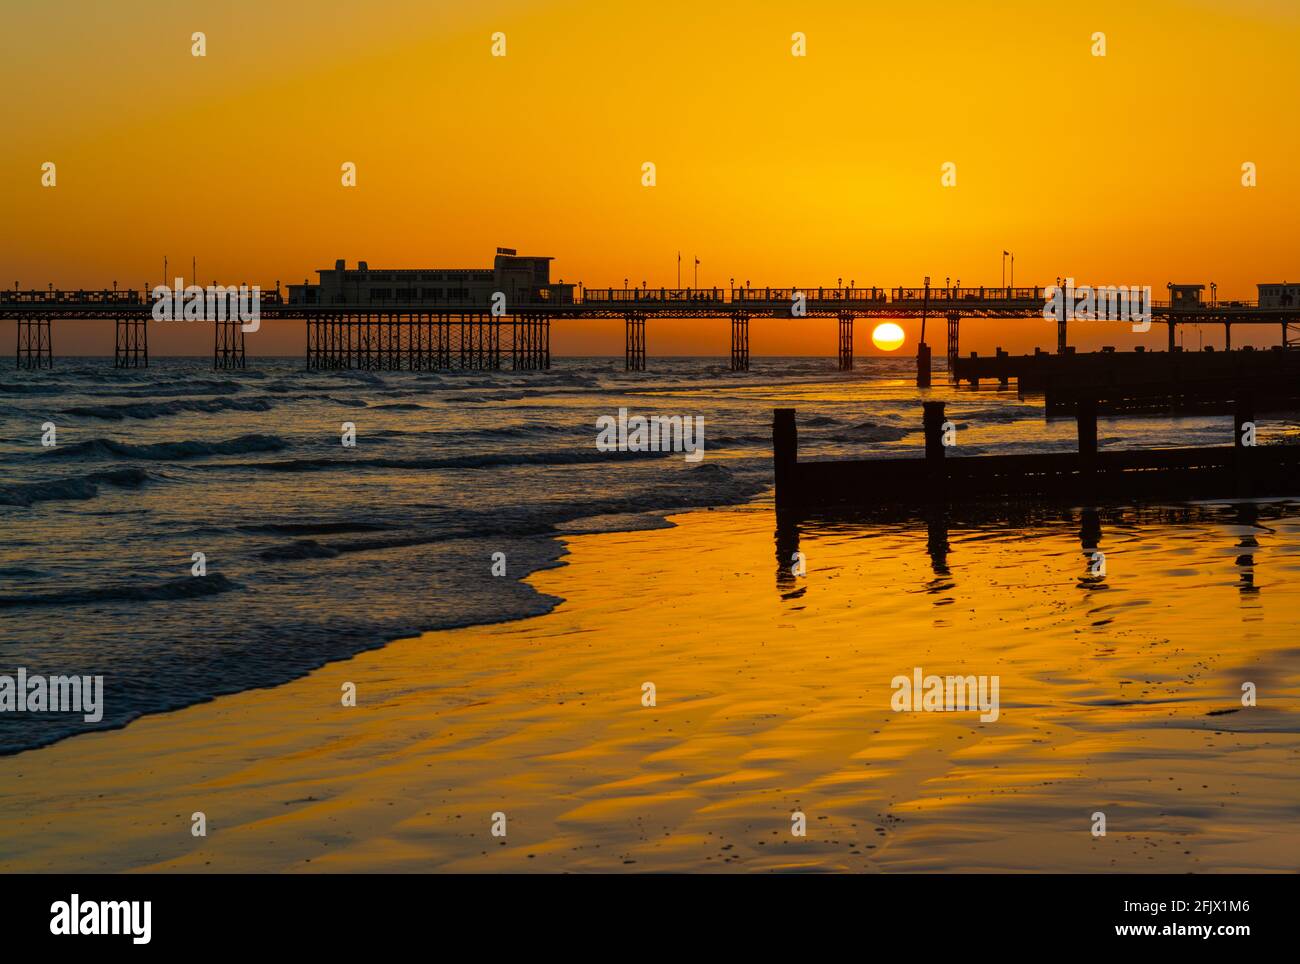 Sunset over the sea at Worthing Pier in Worthing, West Sussex, England, UK. Stock Photo